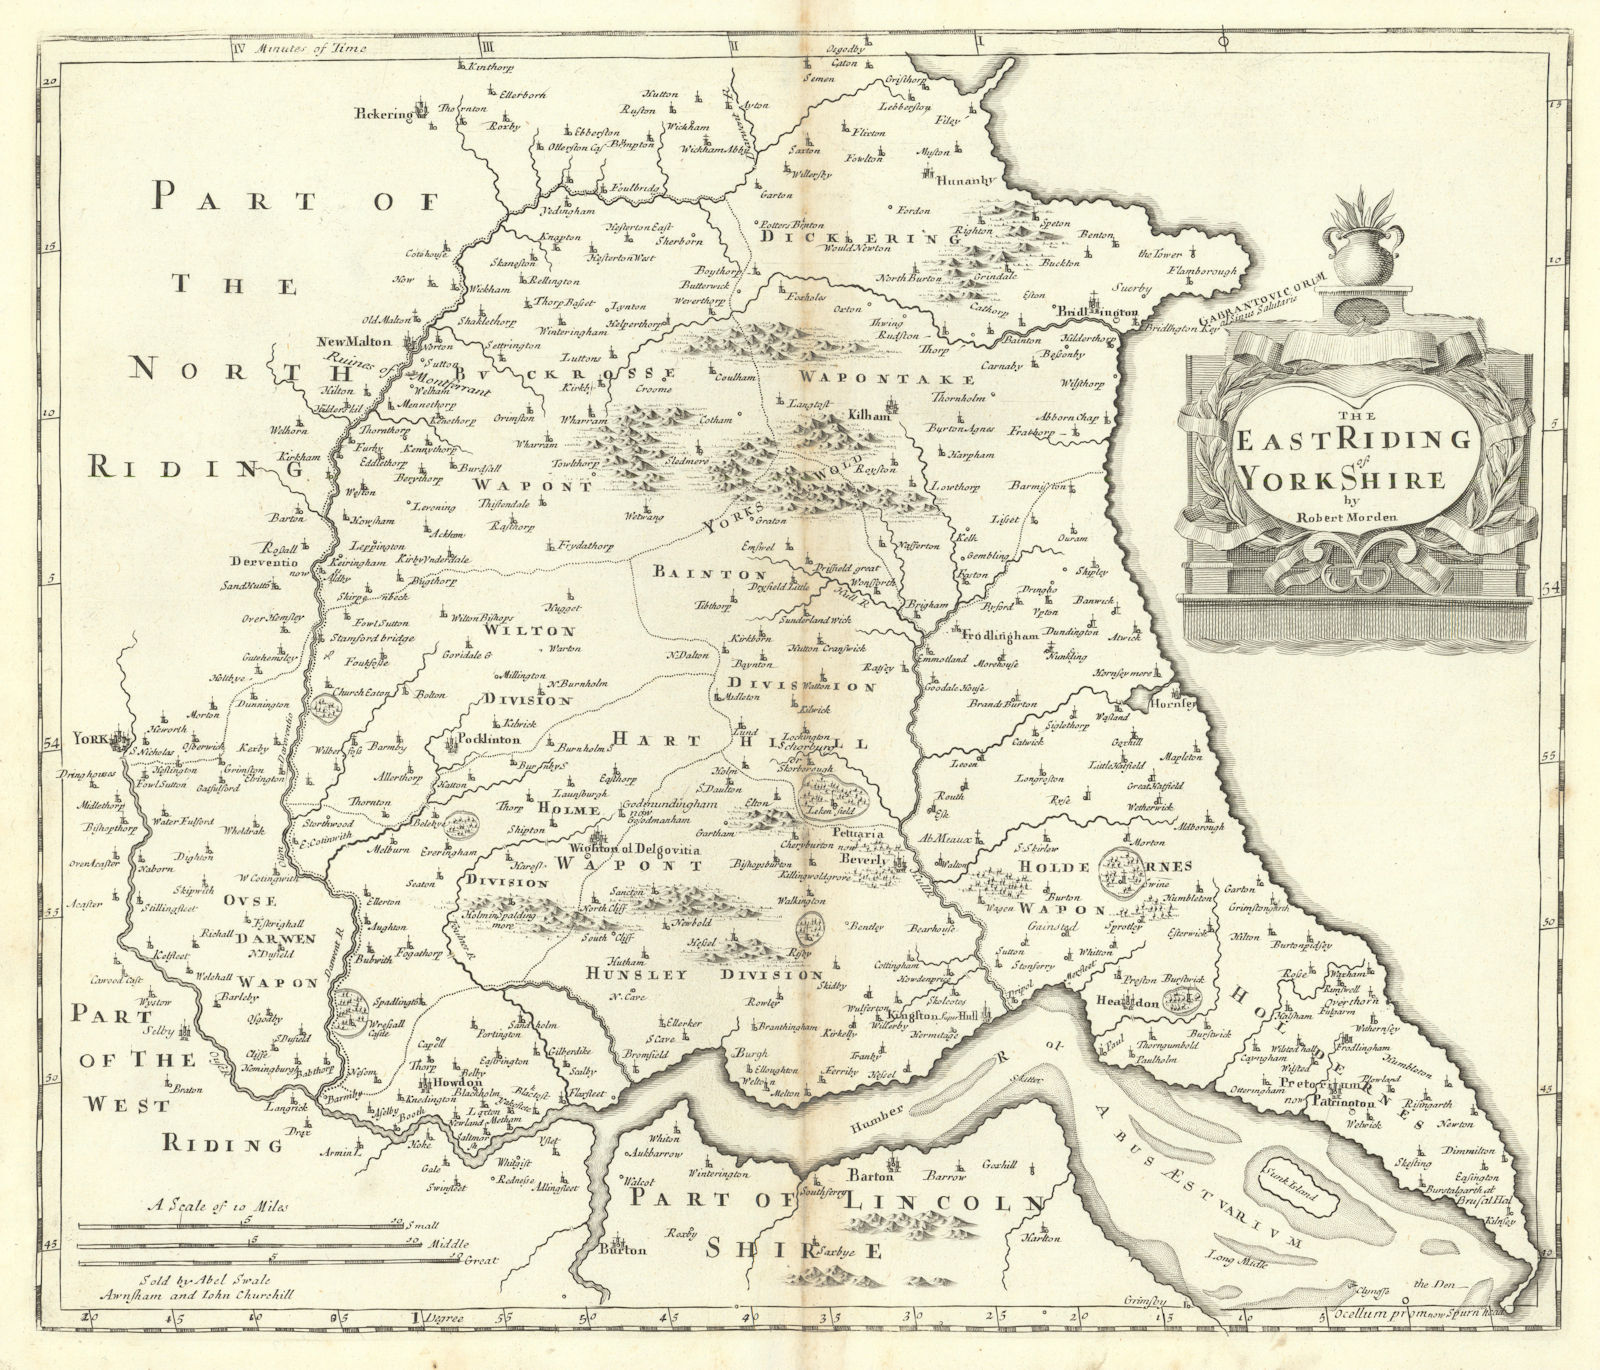 EAST RIDING OF YORKSHIRE by ROBERT MORDEN from Camden's Britannia 1722 old map